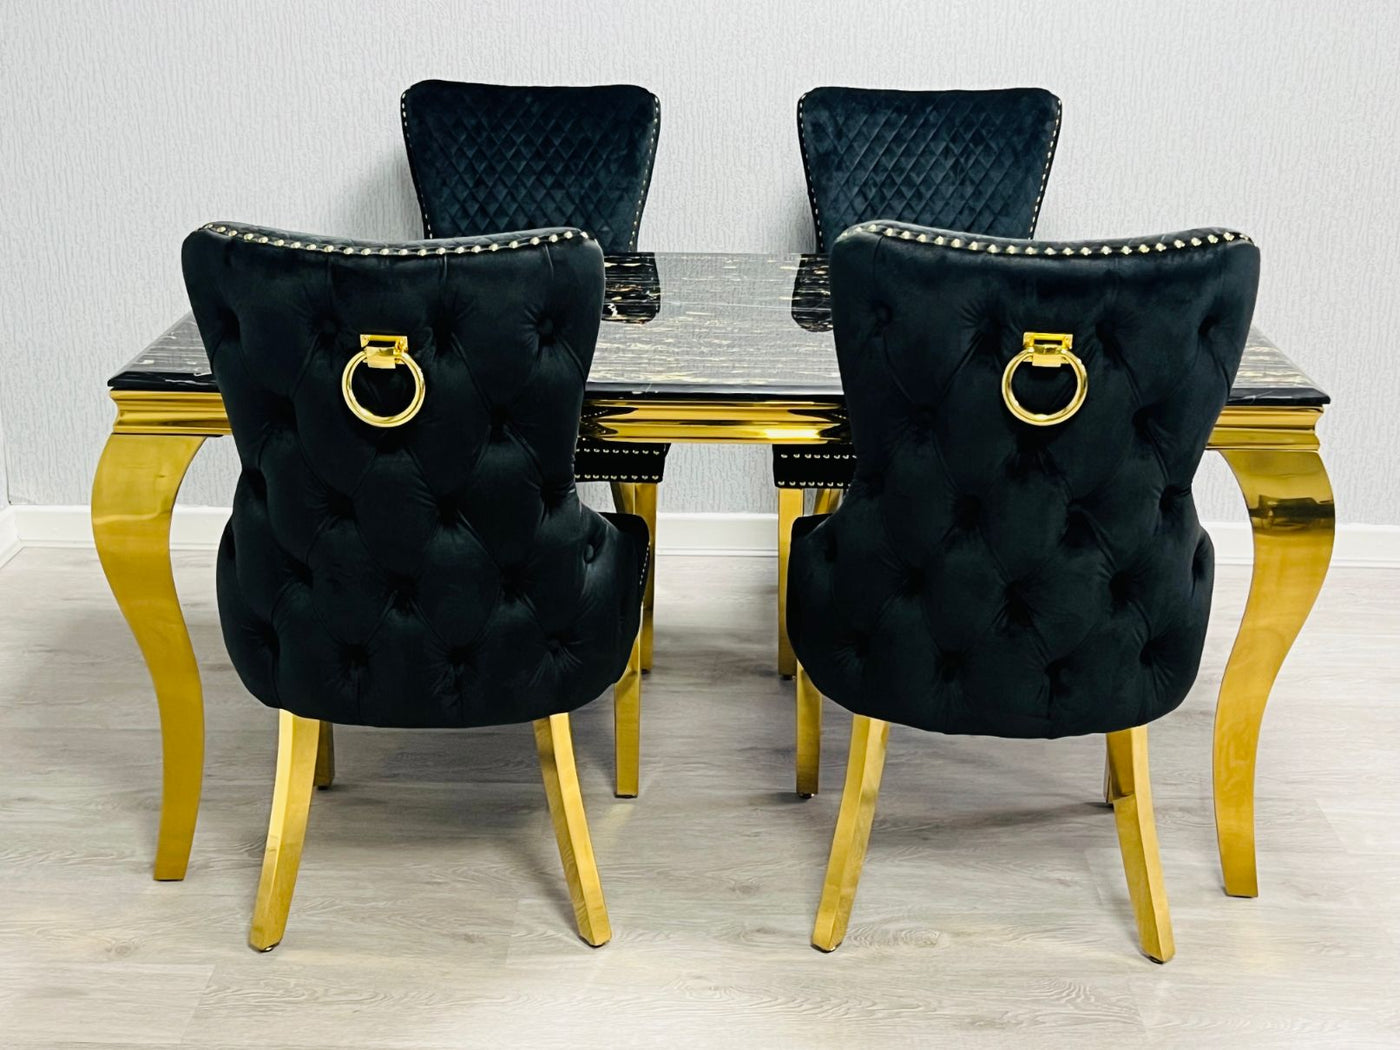 Louis Gold Black Marble Dining Table With Shimmer Black / Gold Ring Knocker Dining Chairs